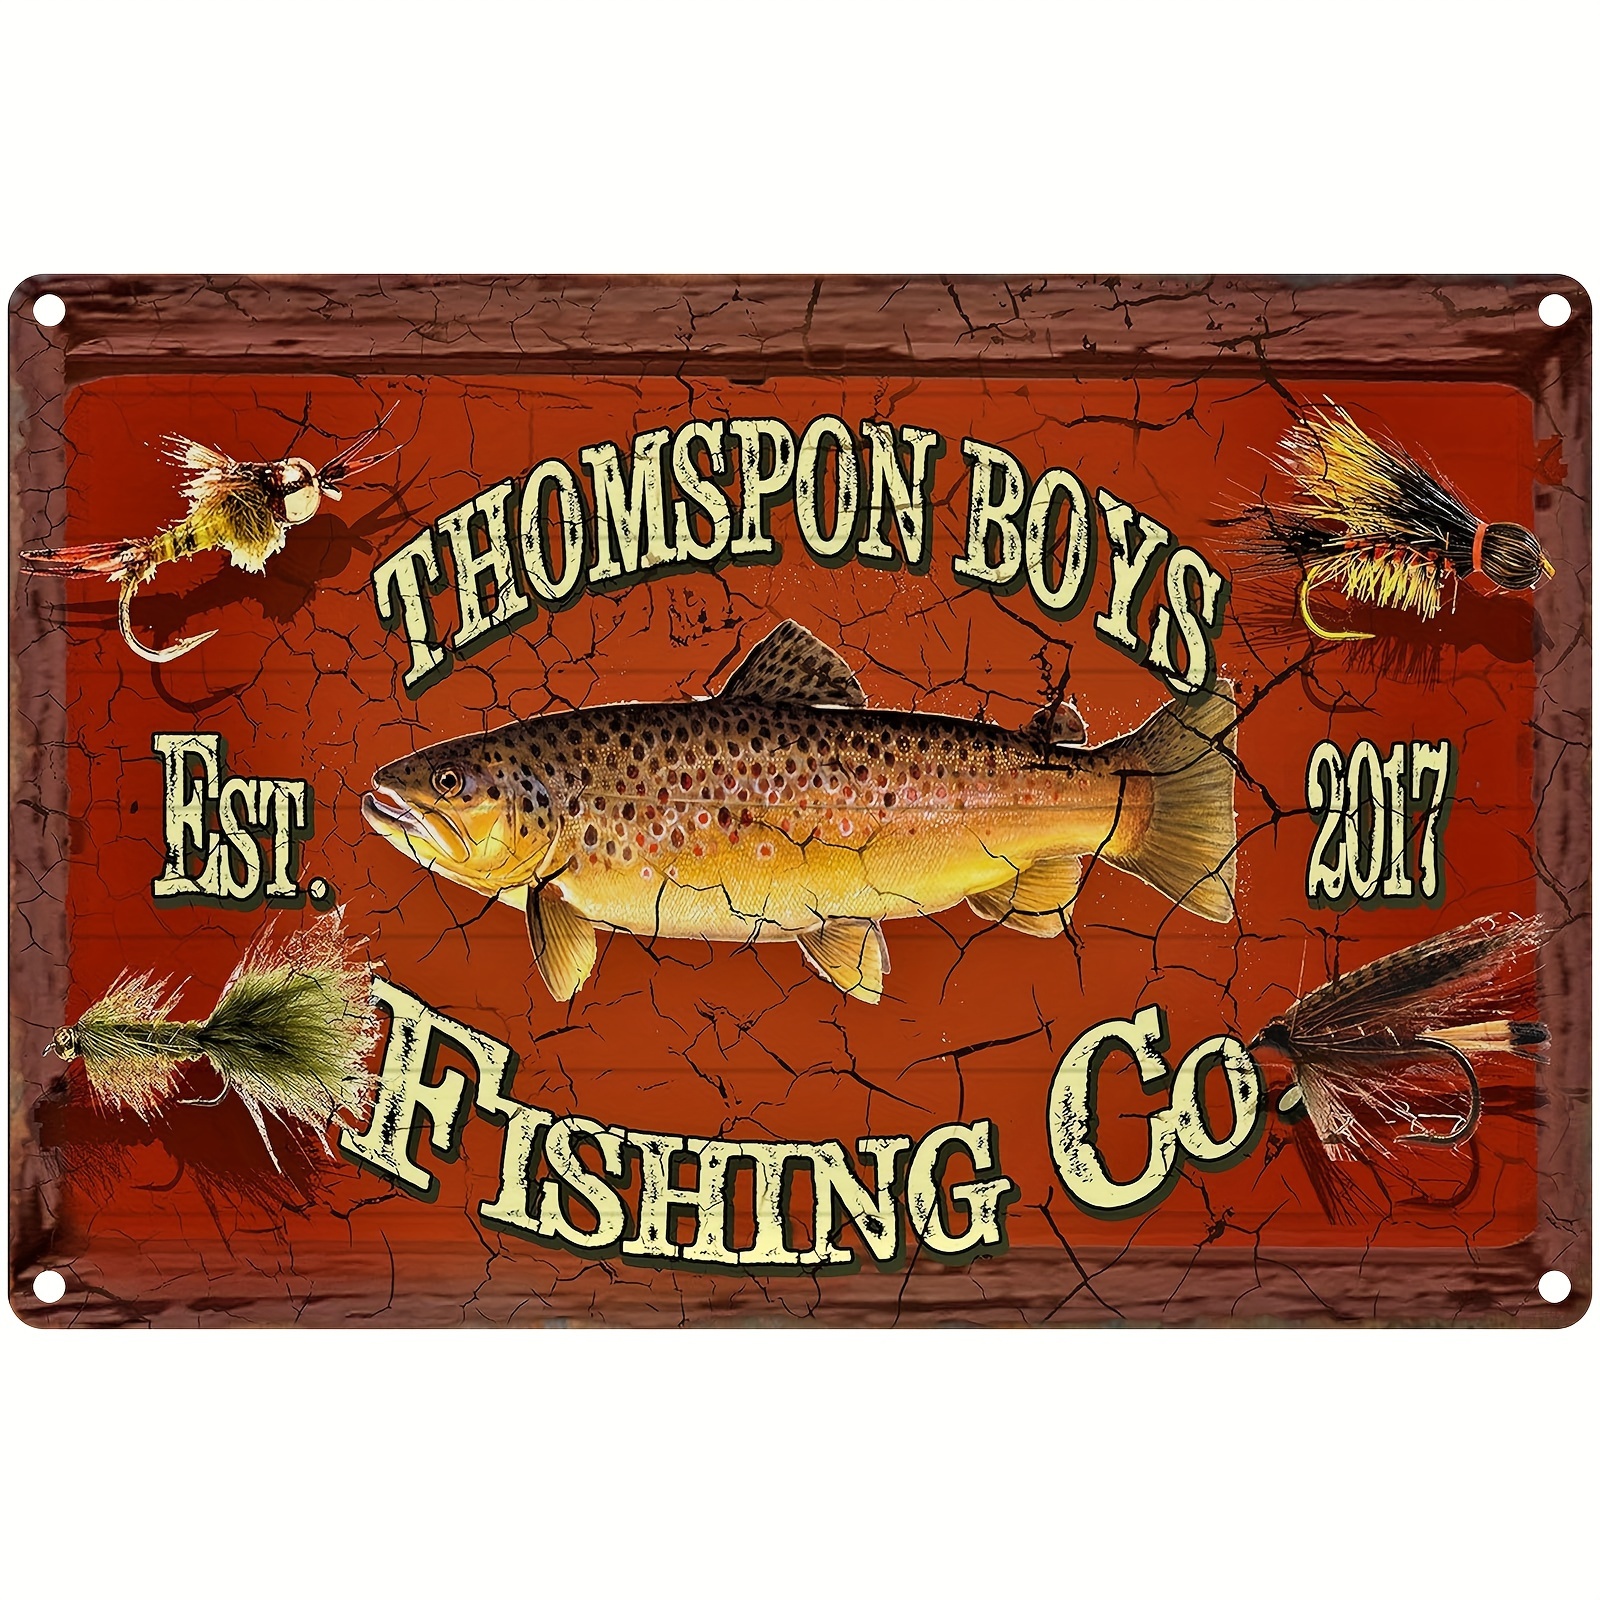 Tin Winchester Sign  Vintage fishing, Fishing tackle, Fishing signs